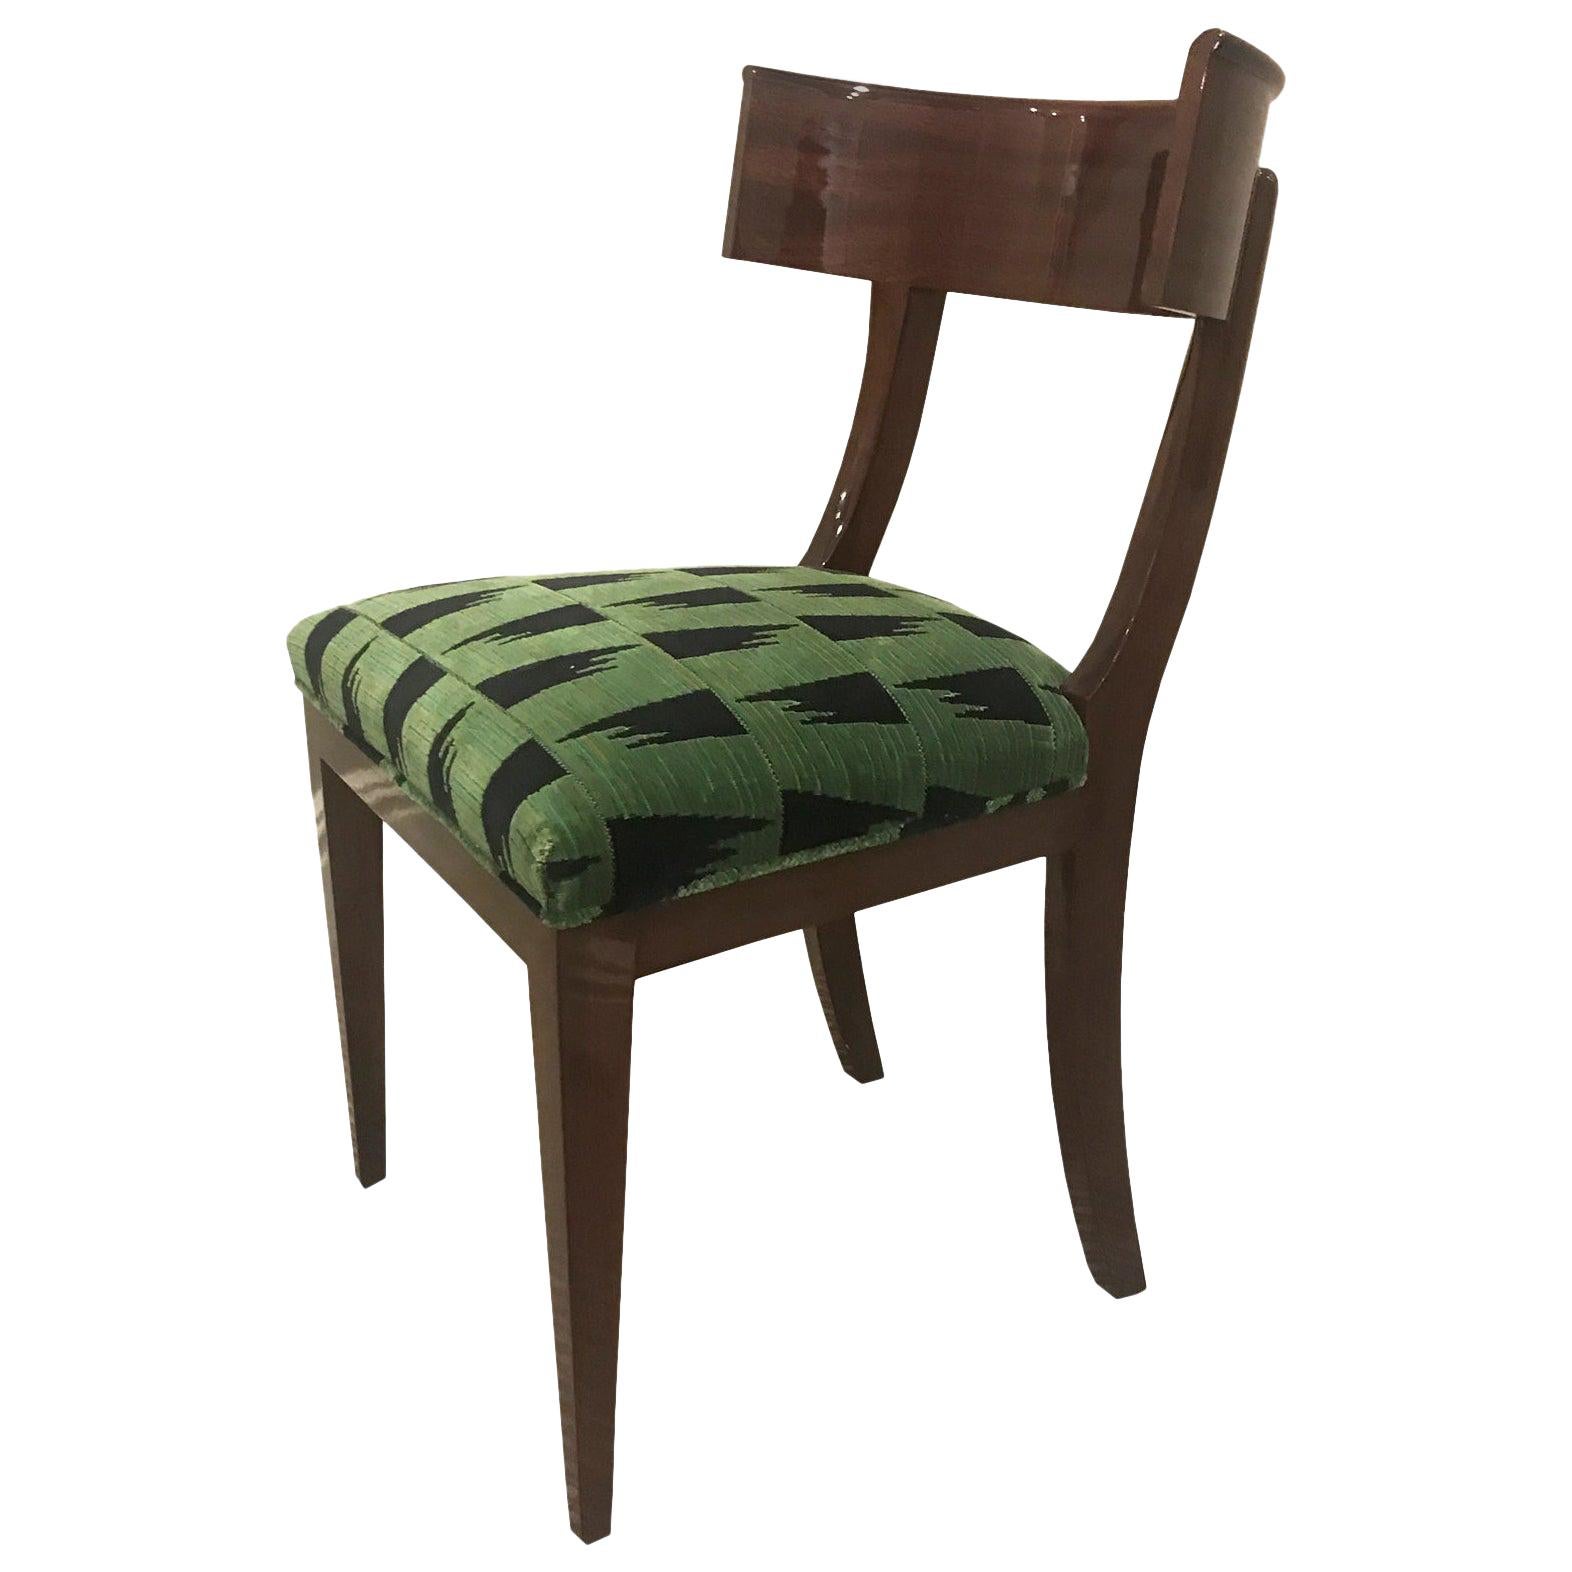 Contemporary Mahogany Klismos Dining Chair with Green Upholstery